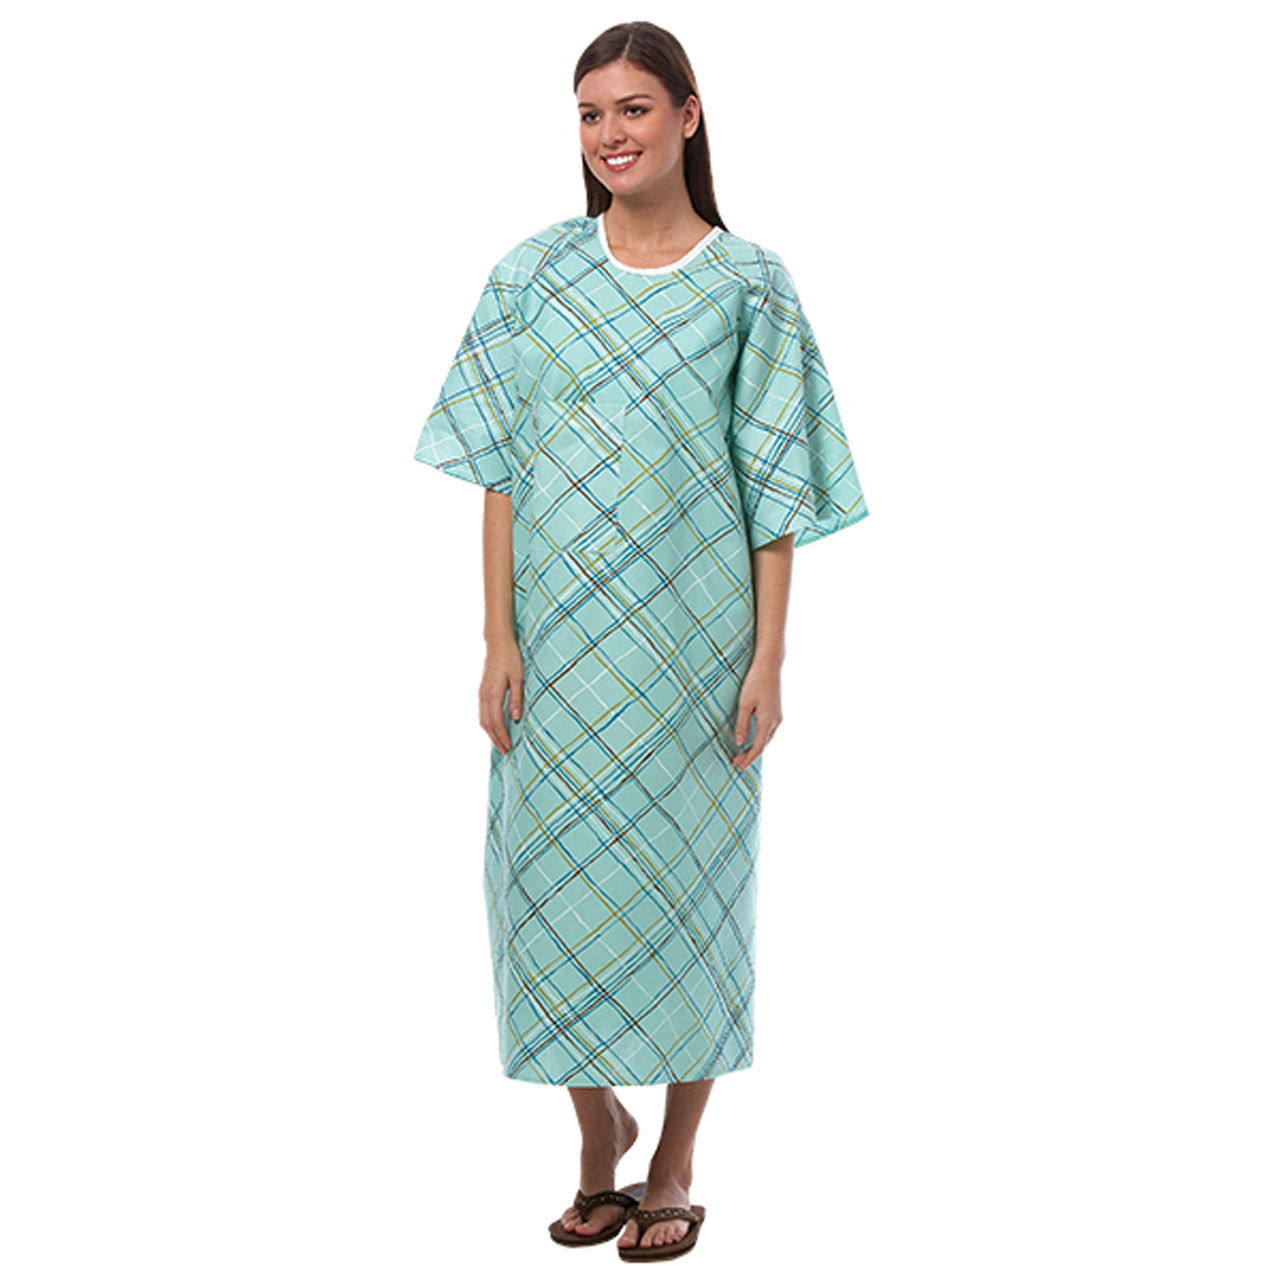 What specific features and measurements does this hospital gown have?